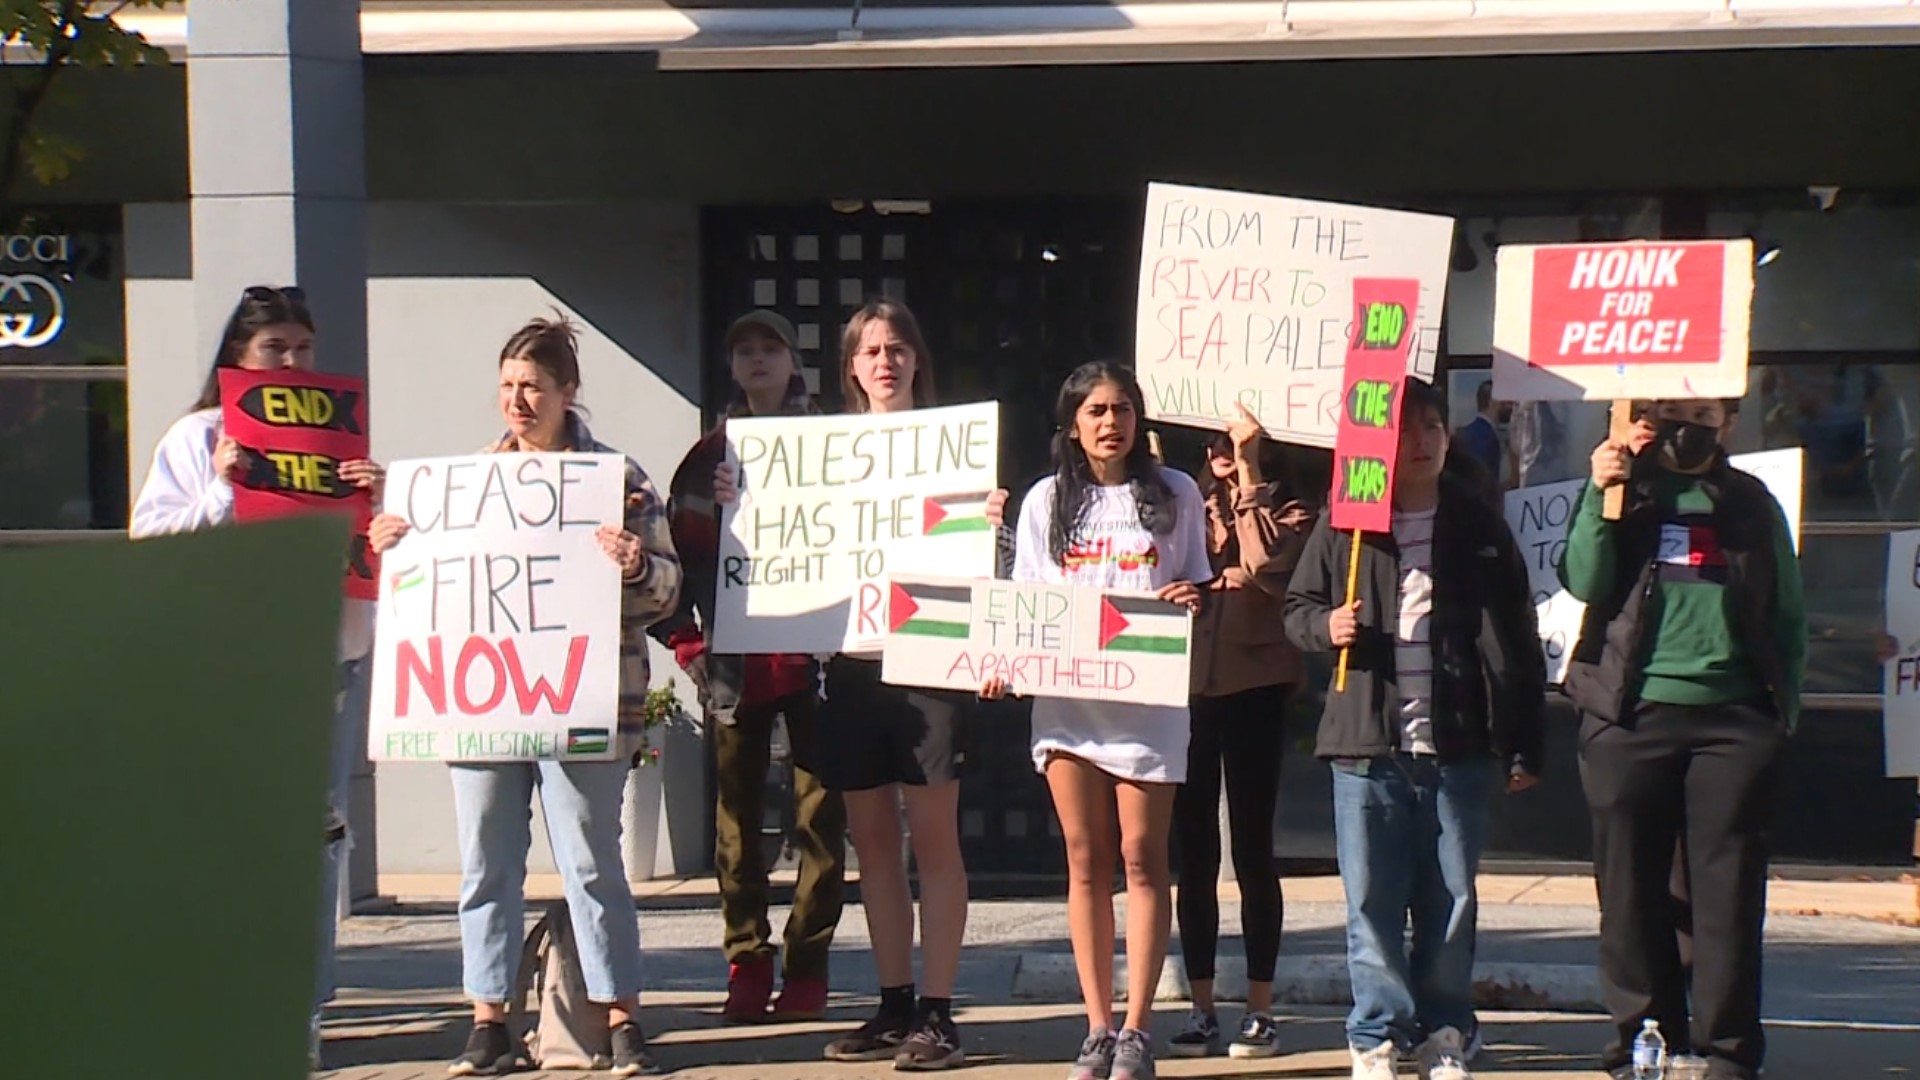 A "Free Palestine" march and rally was held on Saturday, Nov. 4 in Fayetteville.